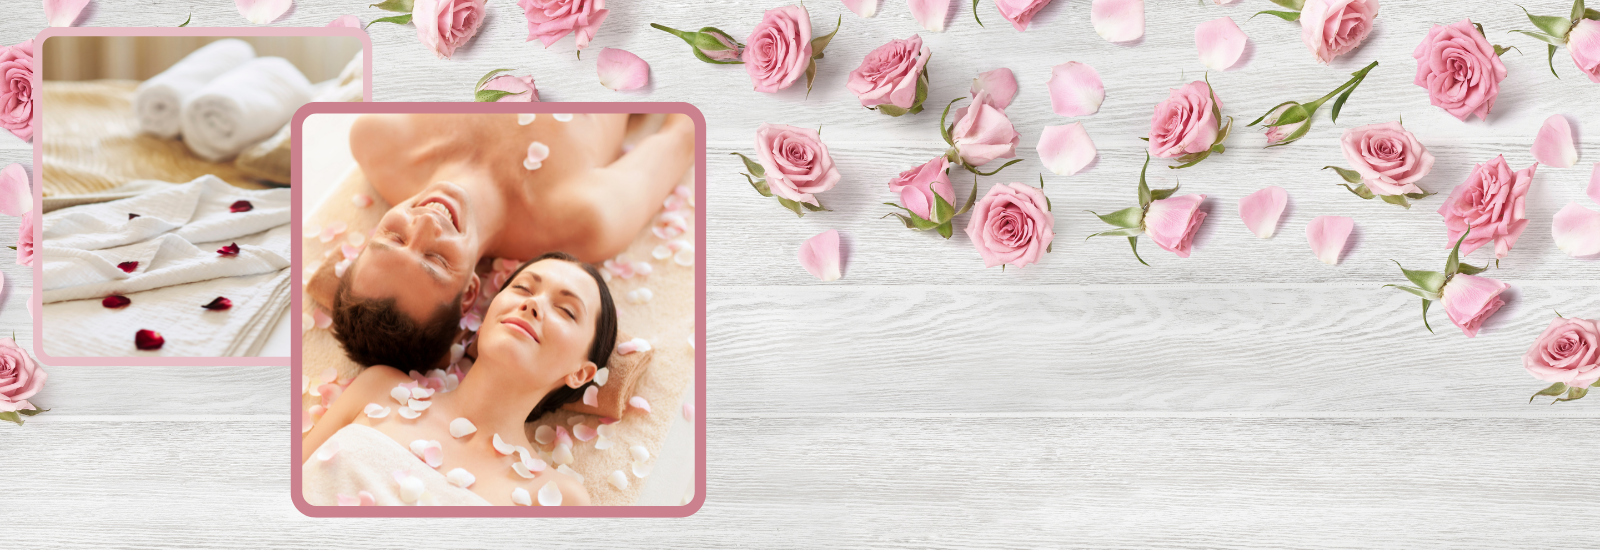 Space Coast Massage and Spa Valentine's Day Spa Packages